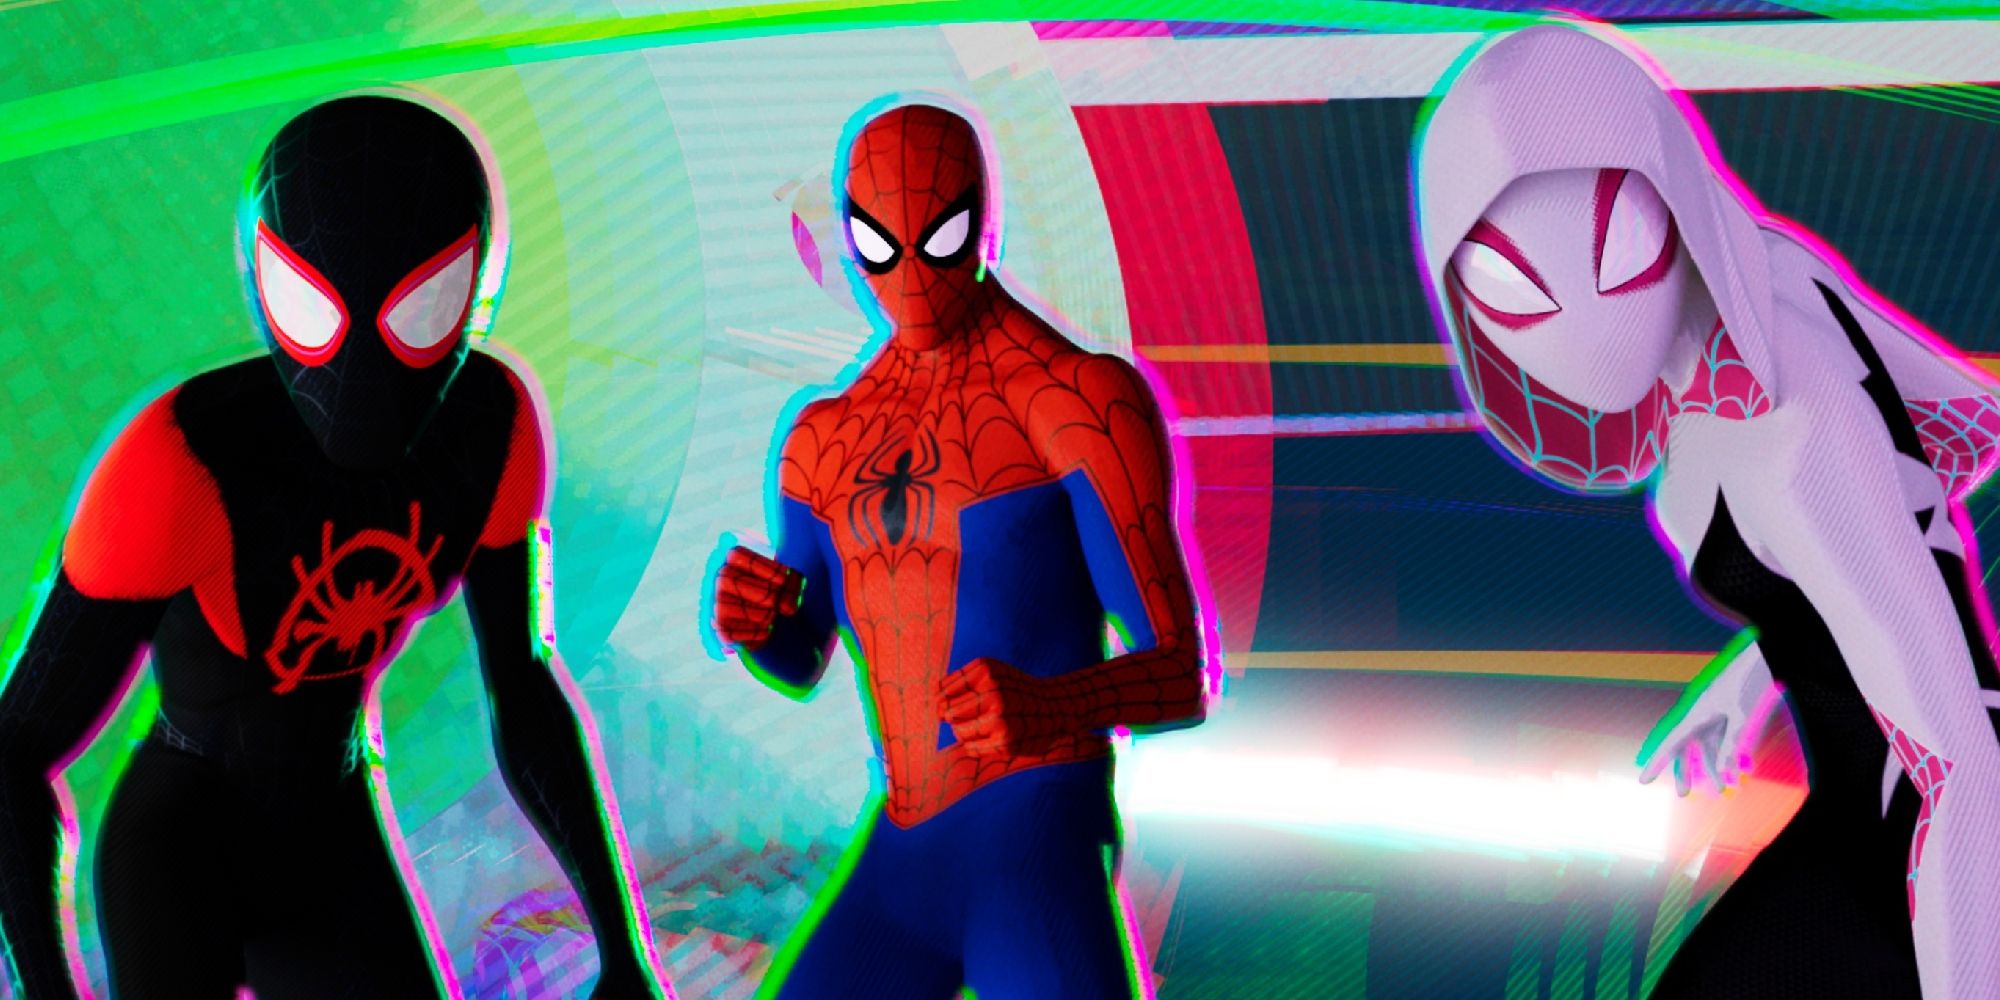 Miles Morales, Peter B. Parker, and Gwen Stacy suited up in the multiverse to fight